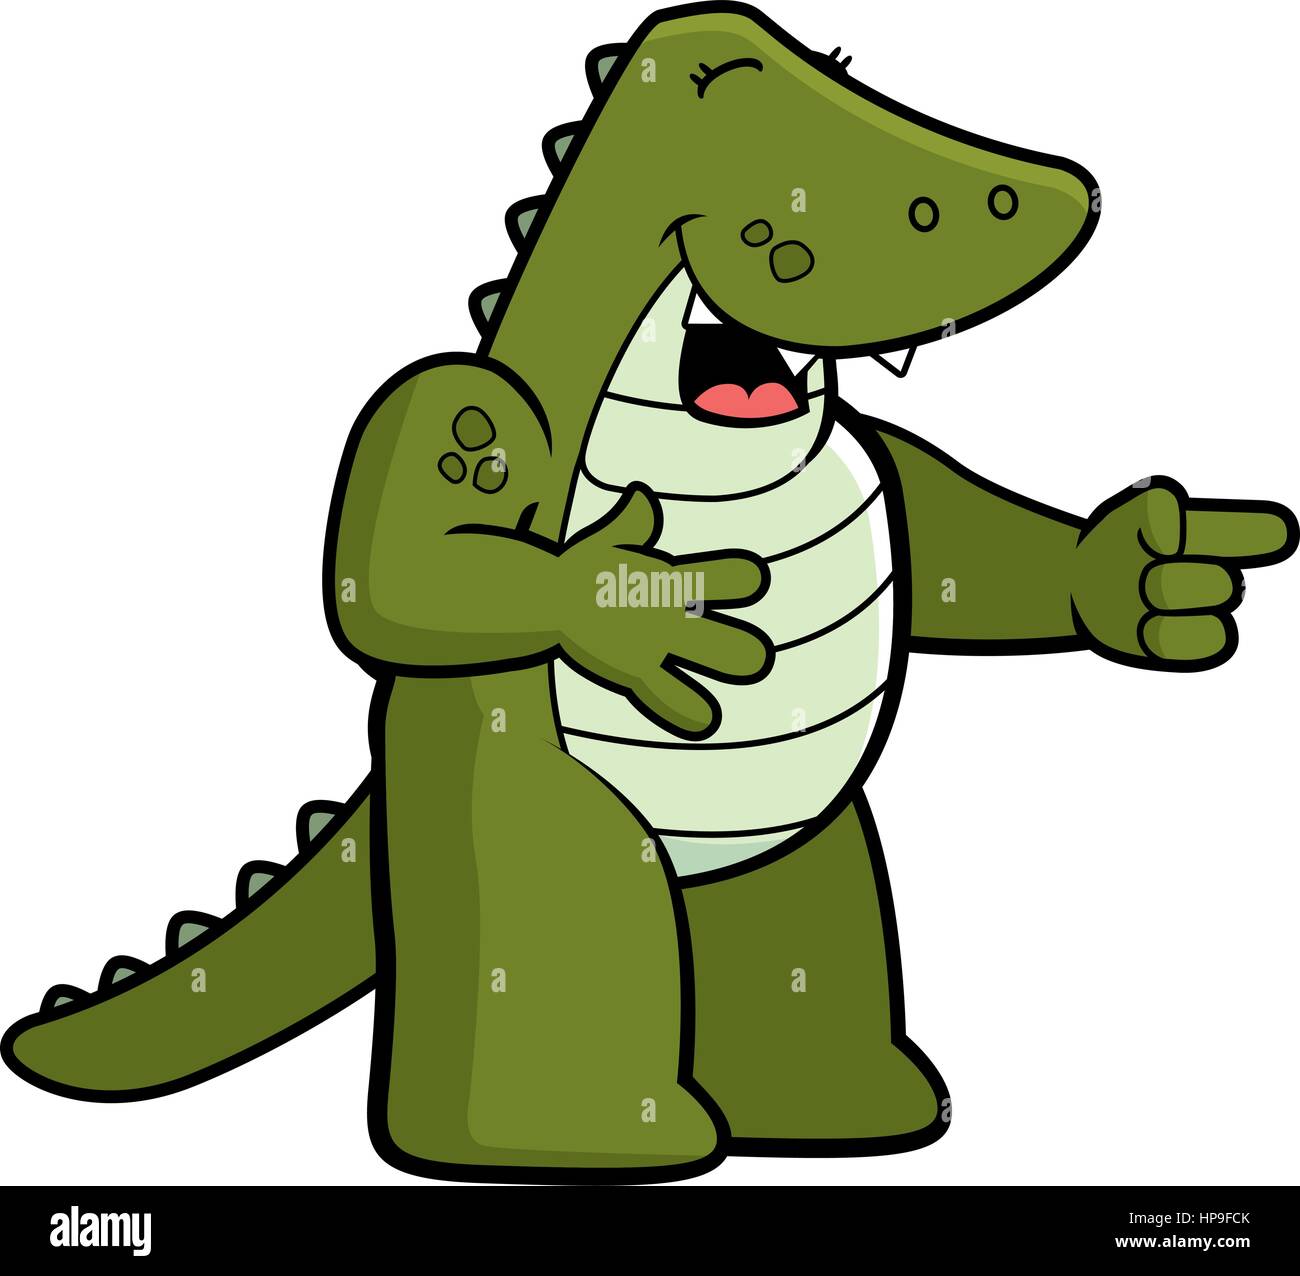 A happy cartoon alligator pointing and laughing. Stock Vector